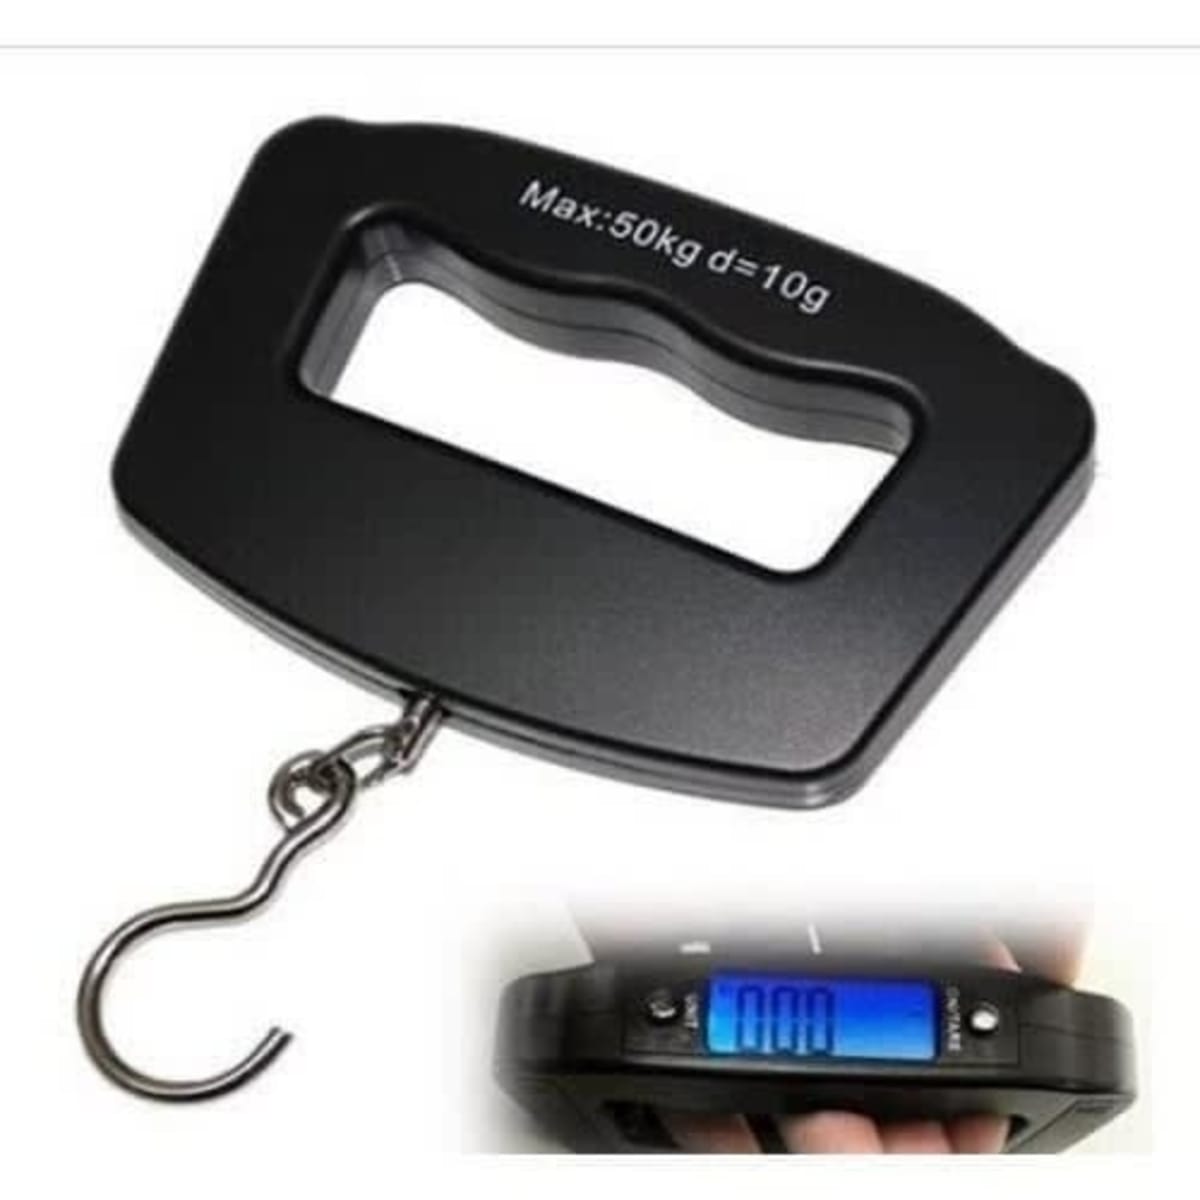 Portable Handheld Electronic Scale For Luggage Weighing, Max 50kg Capacity